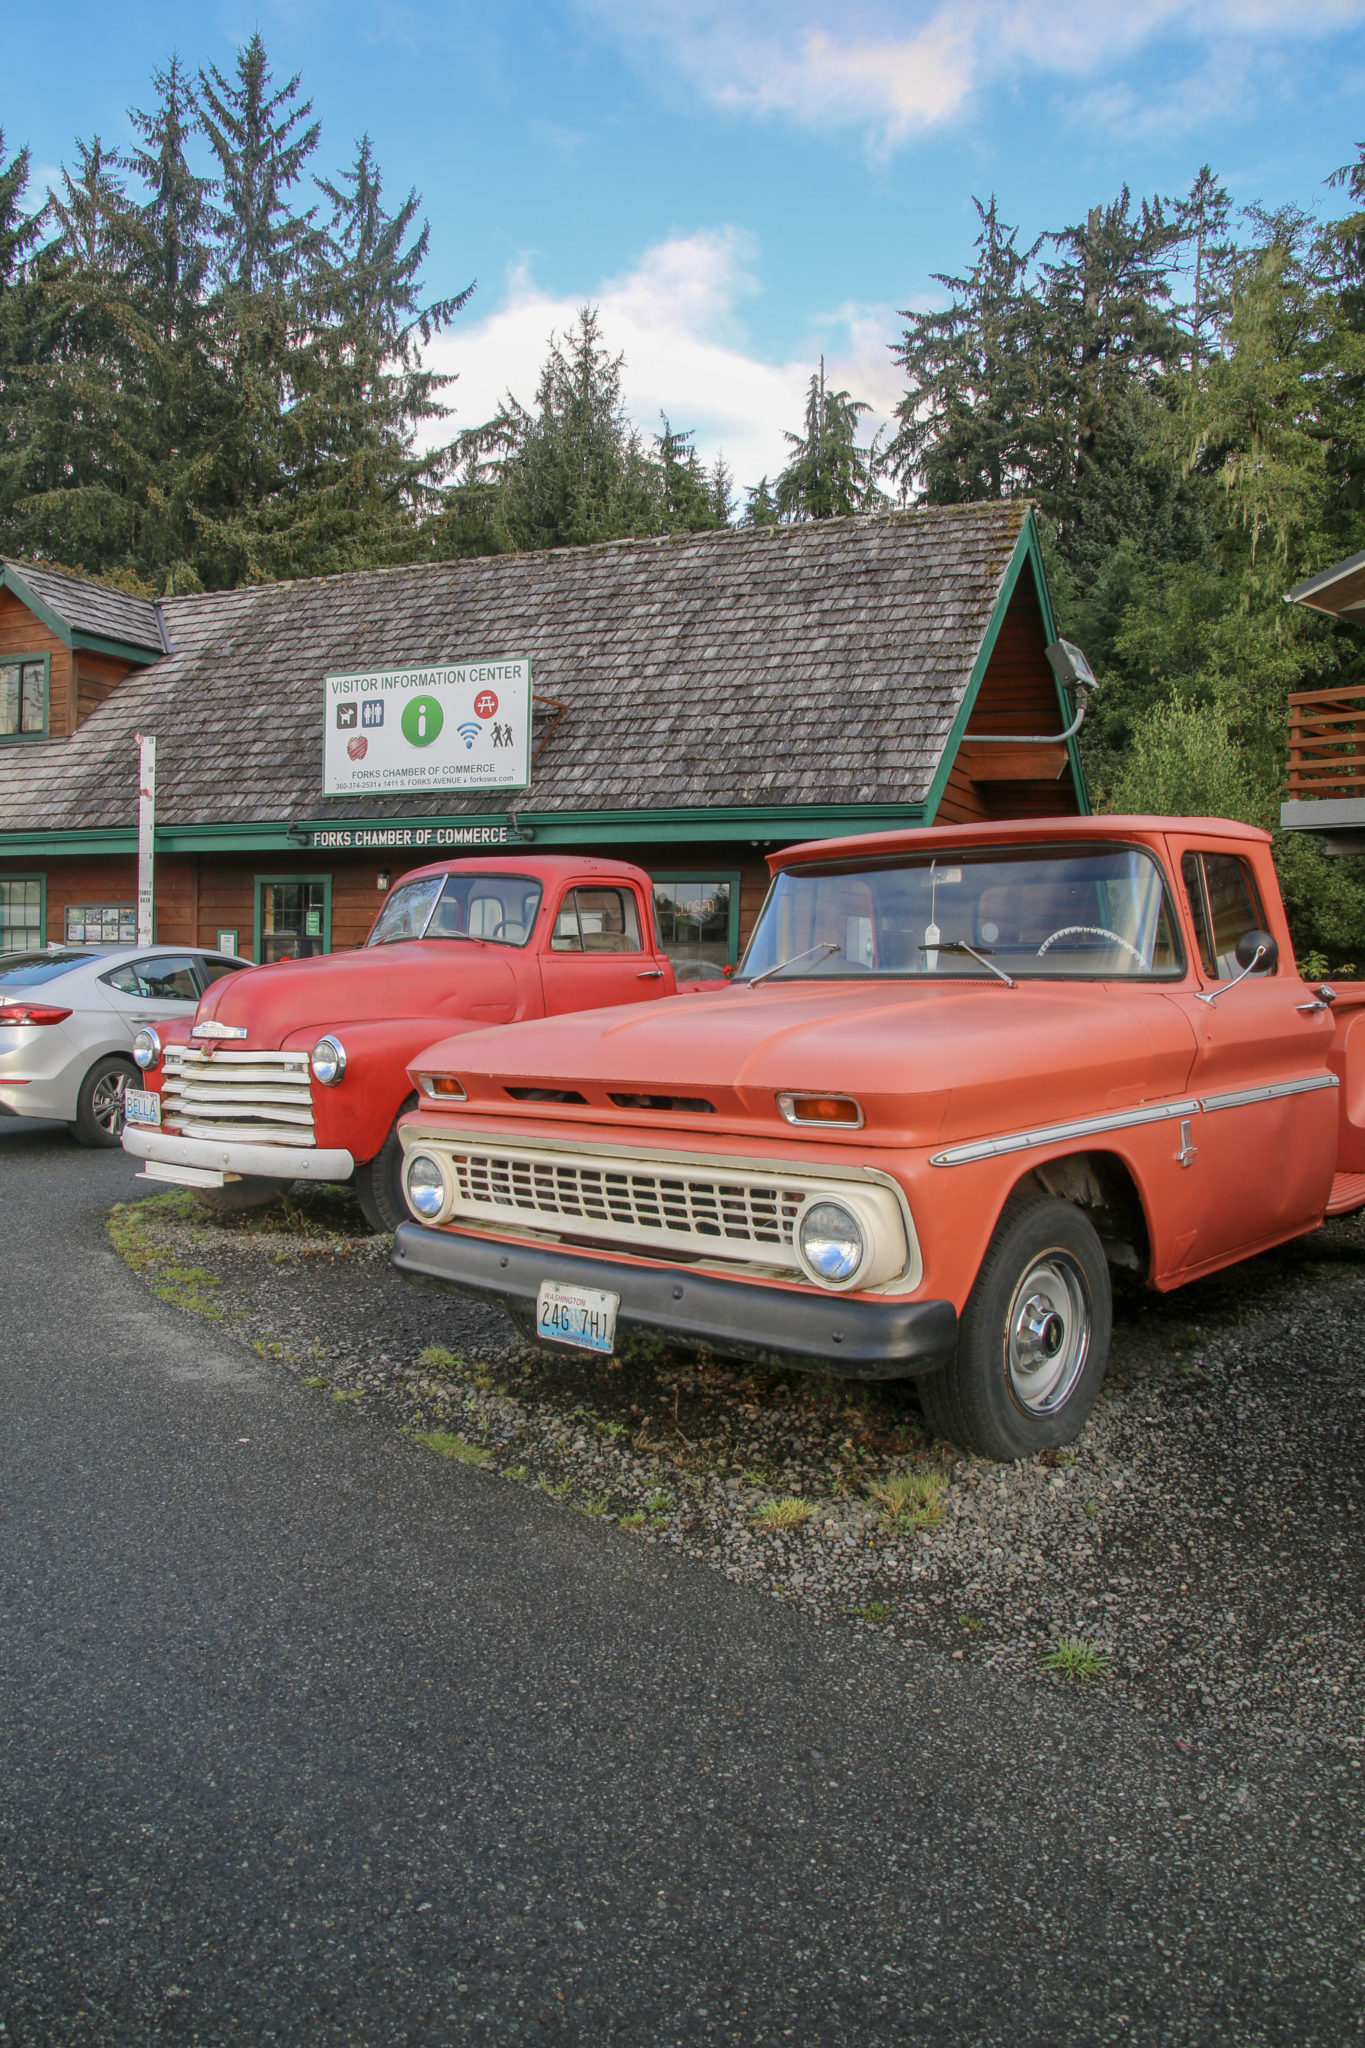 Twilight Truck in Forks on the Olympic Peninsula